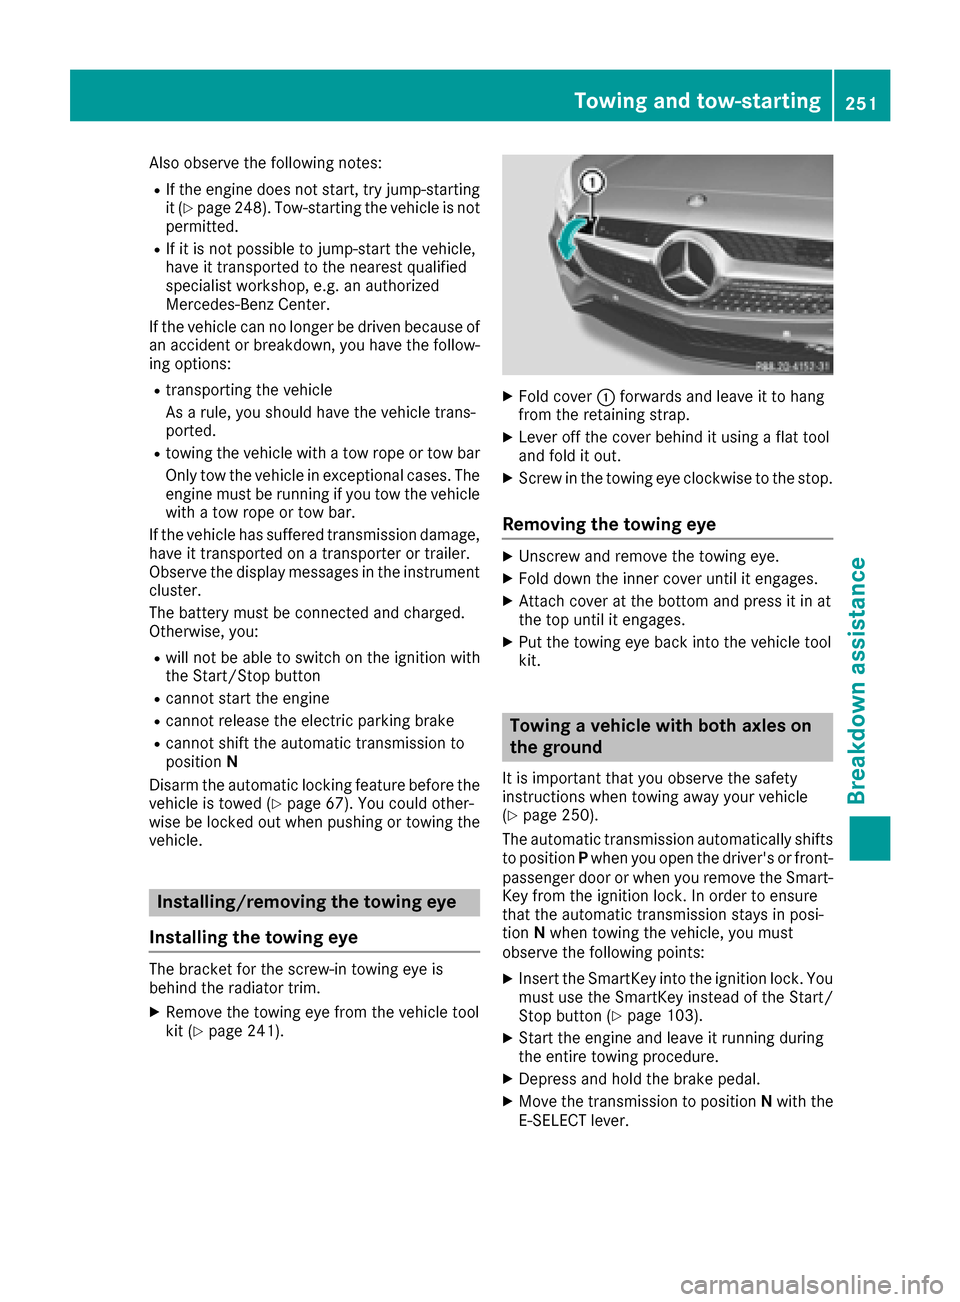 MERCEDES-BENZ AMG GT S 2016 C190 Owners Manual Also observe the following notes:
RIf the engine does not start, try jump-starting
it (Ypage 248). Tow-starting the vehicle is not
permitted.
RIf it is not possible to jump-start the vehicle,
have it 